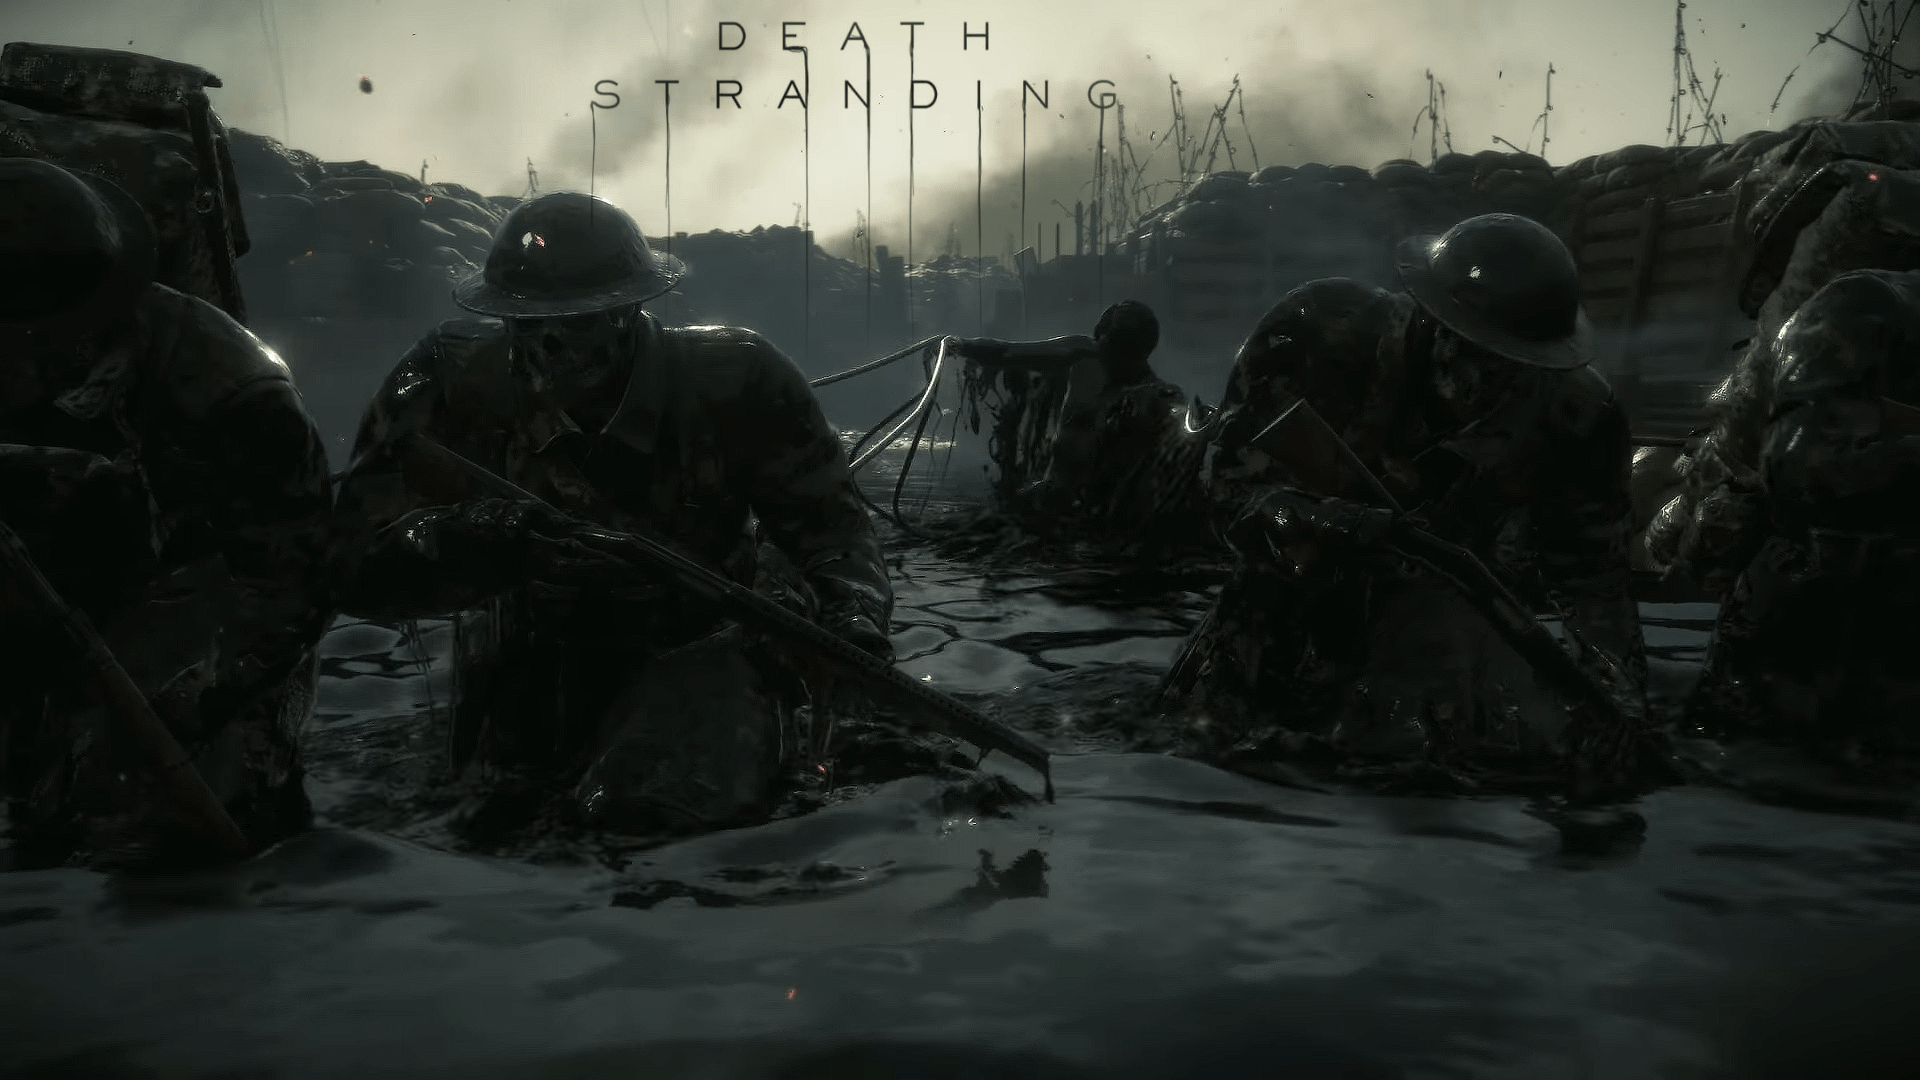 Death Stranding Wallpapers - Top Free Death Stranding Backgrounds ...